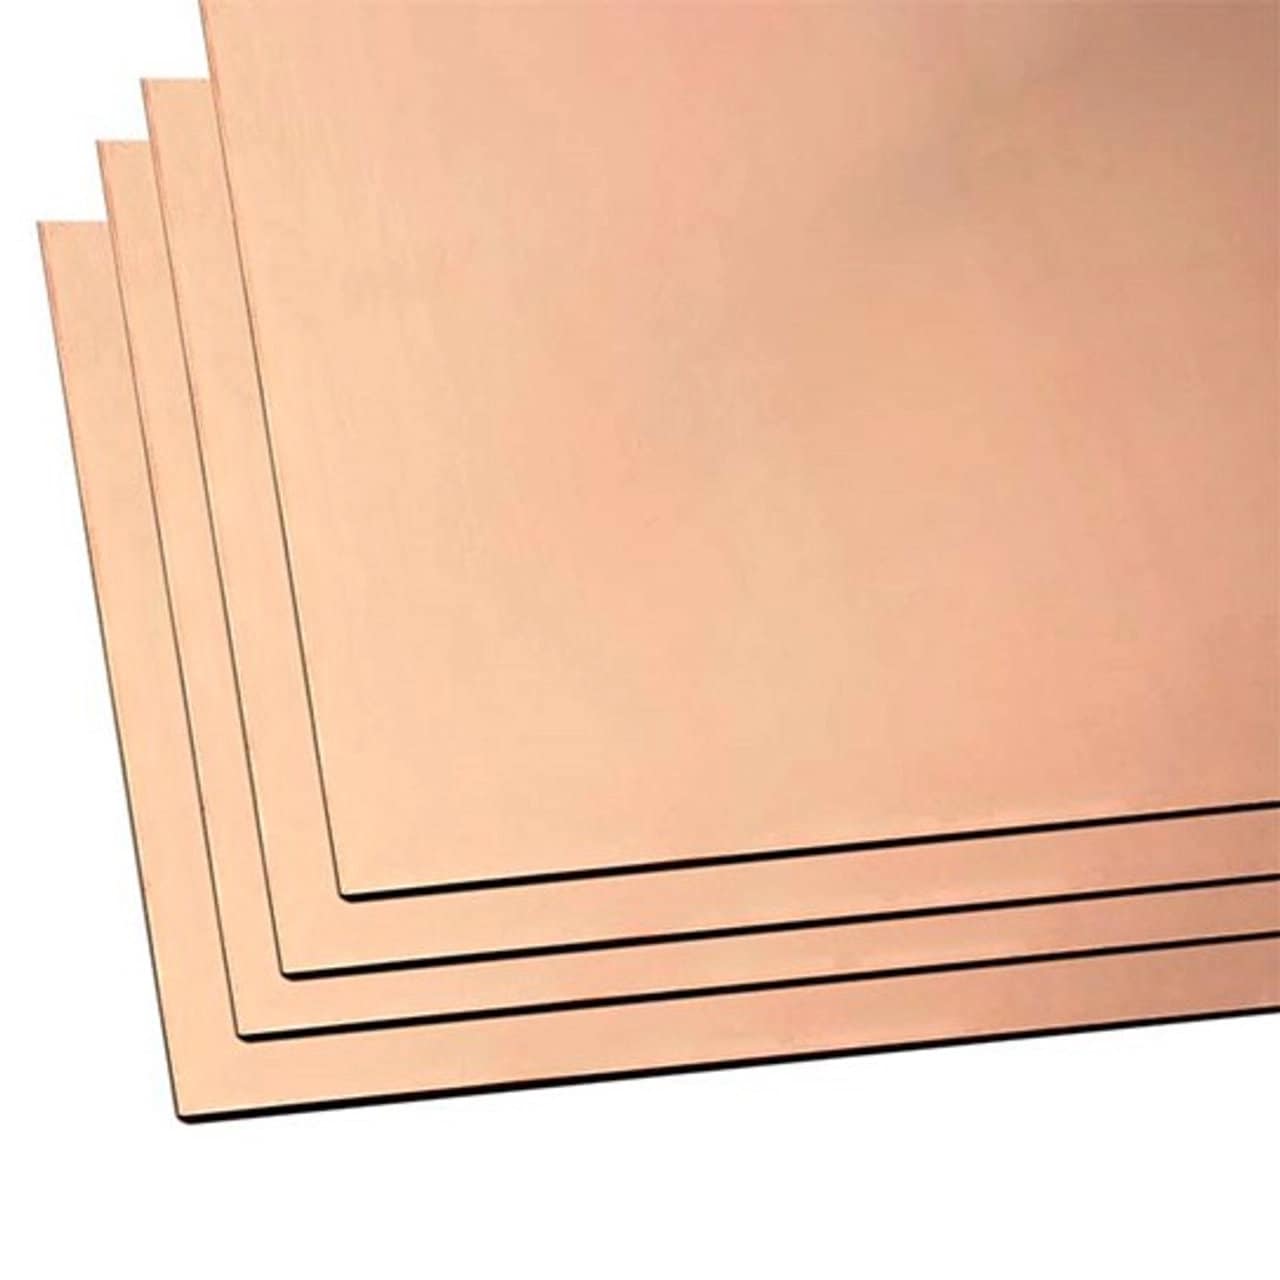 Copper Sheets for Crafts, Copper Sheet, Copper Art Etching Hand Seamers  Tools Steel Sheet Metal, 10packs (Size(mm) : 20 * 20, Thickness(mm) : 1.5)